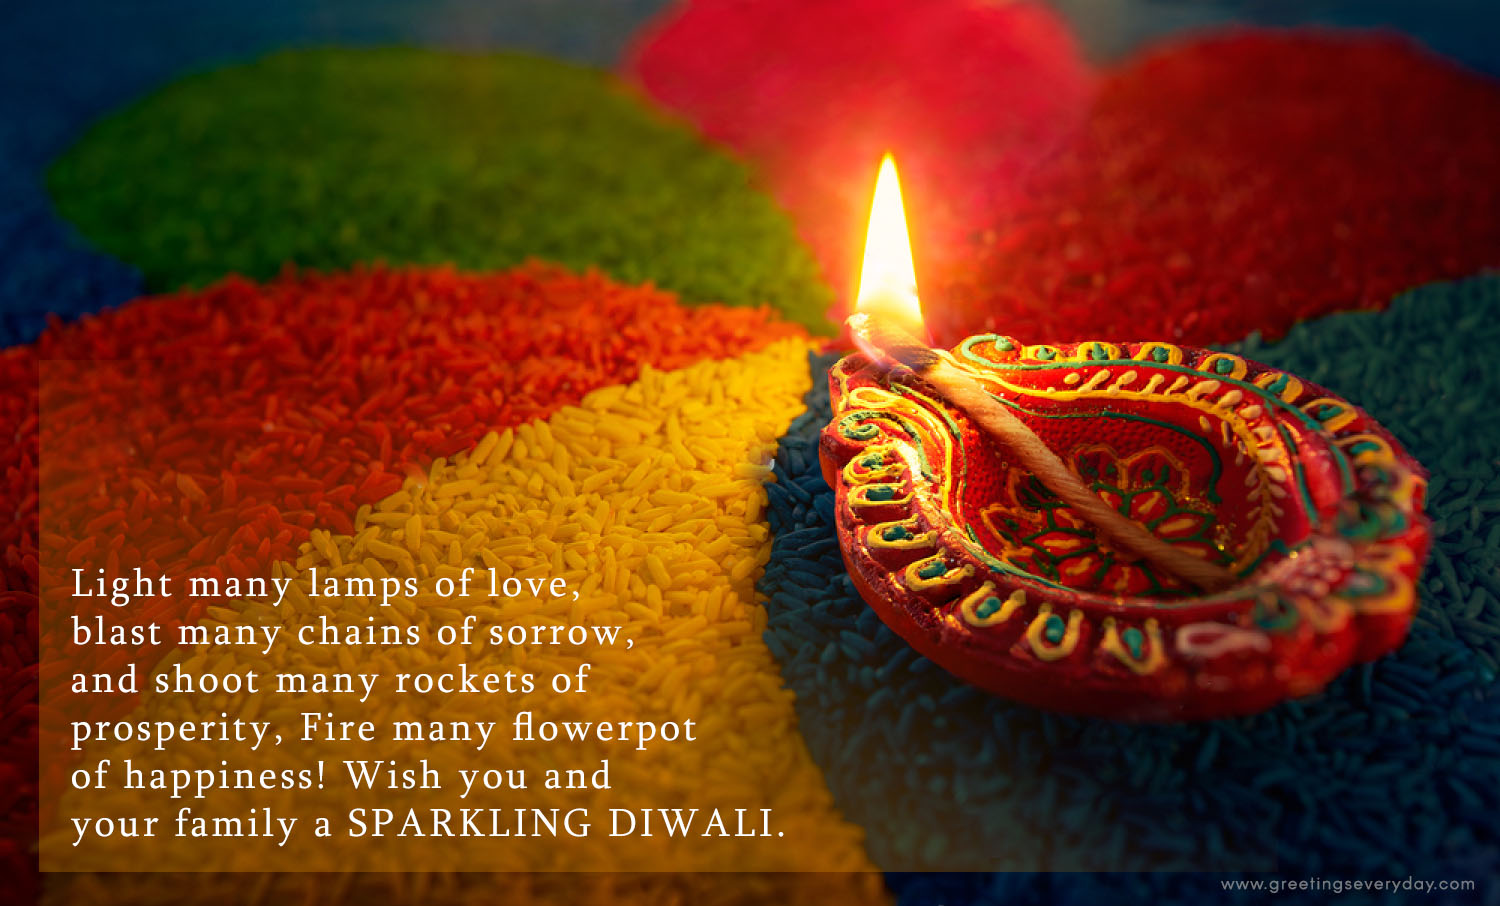 wish you and your family a sparkling diwali